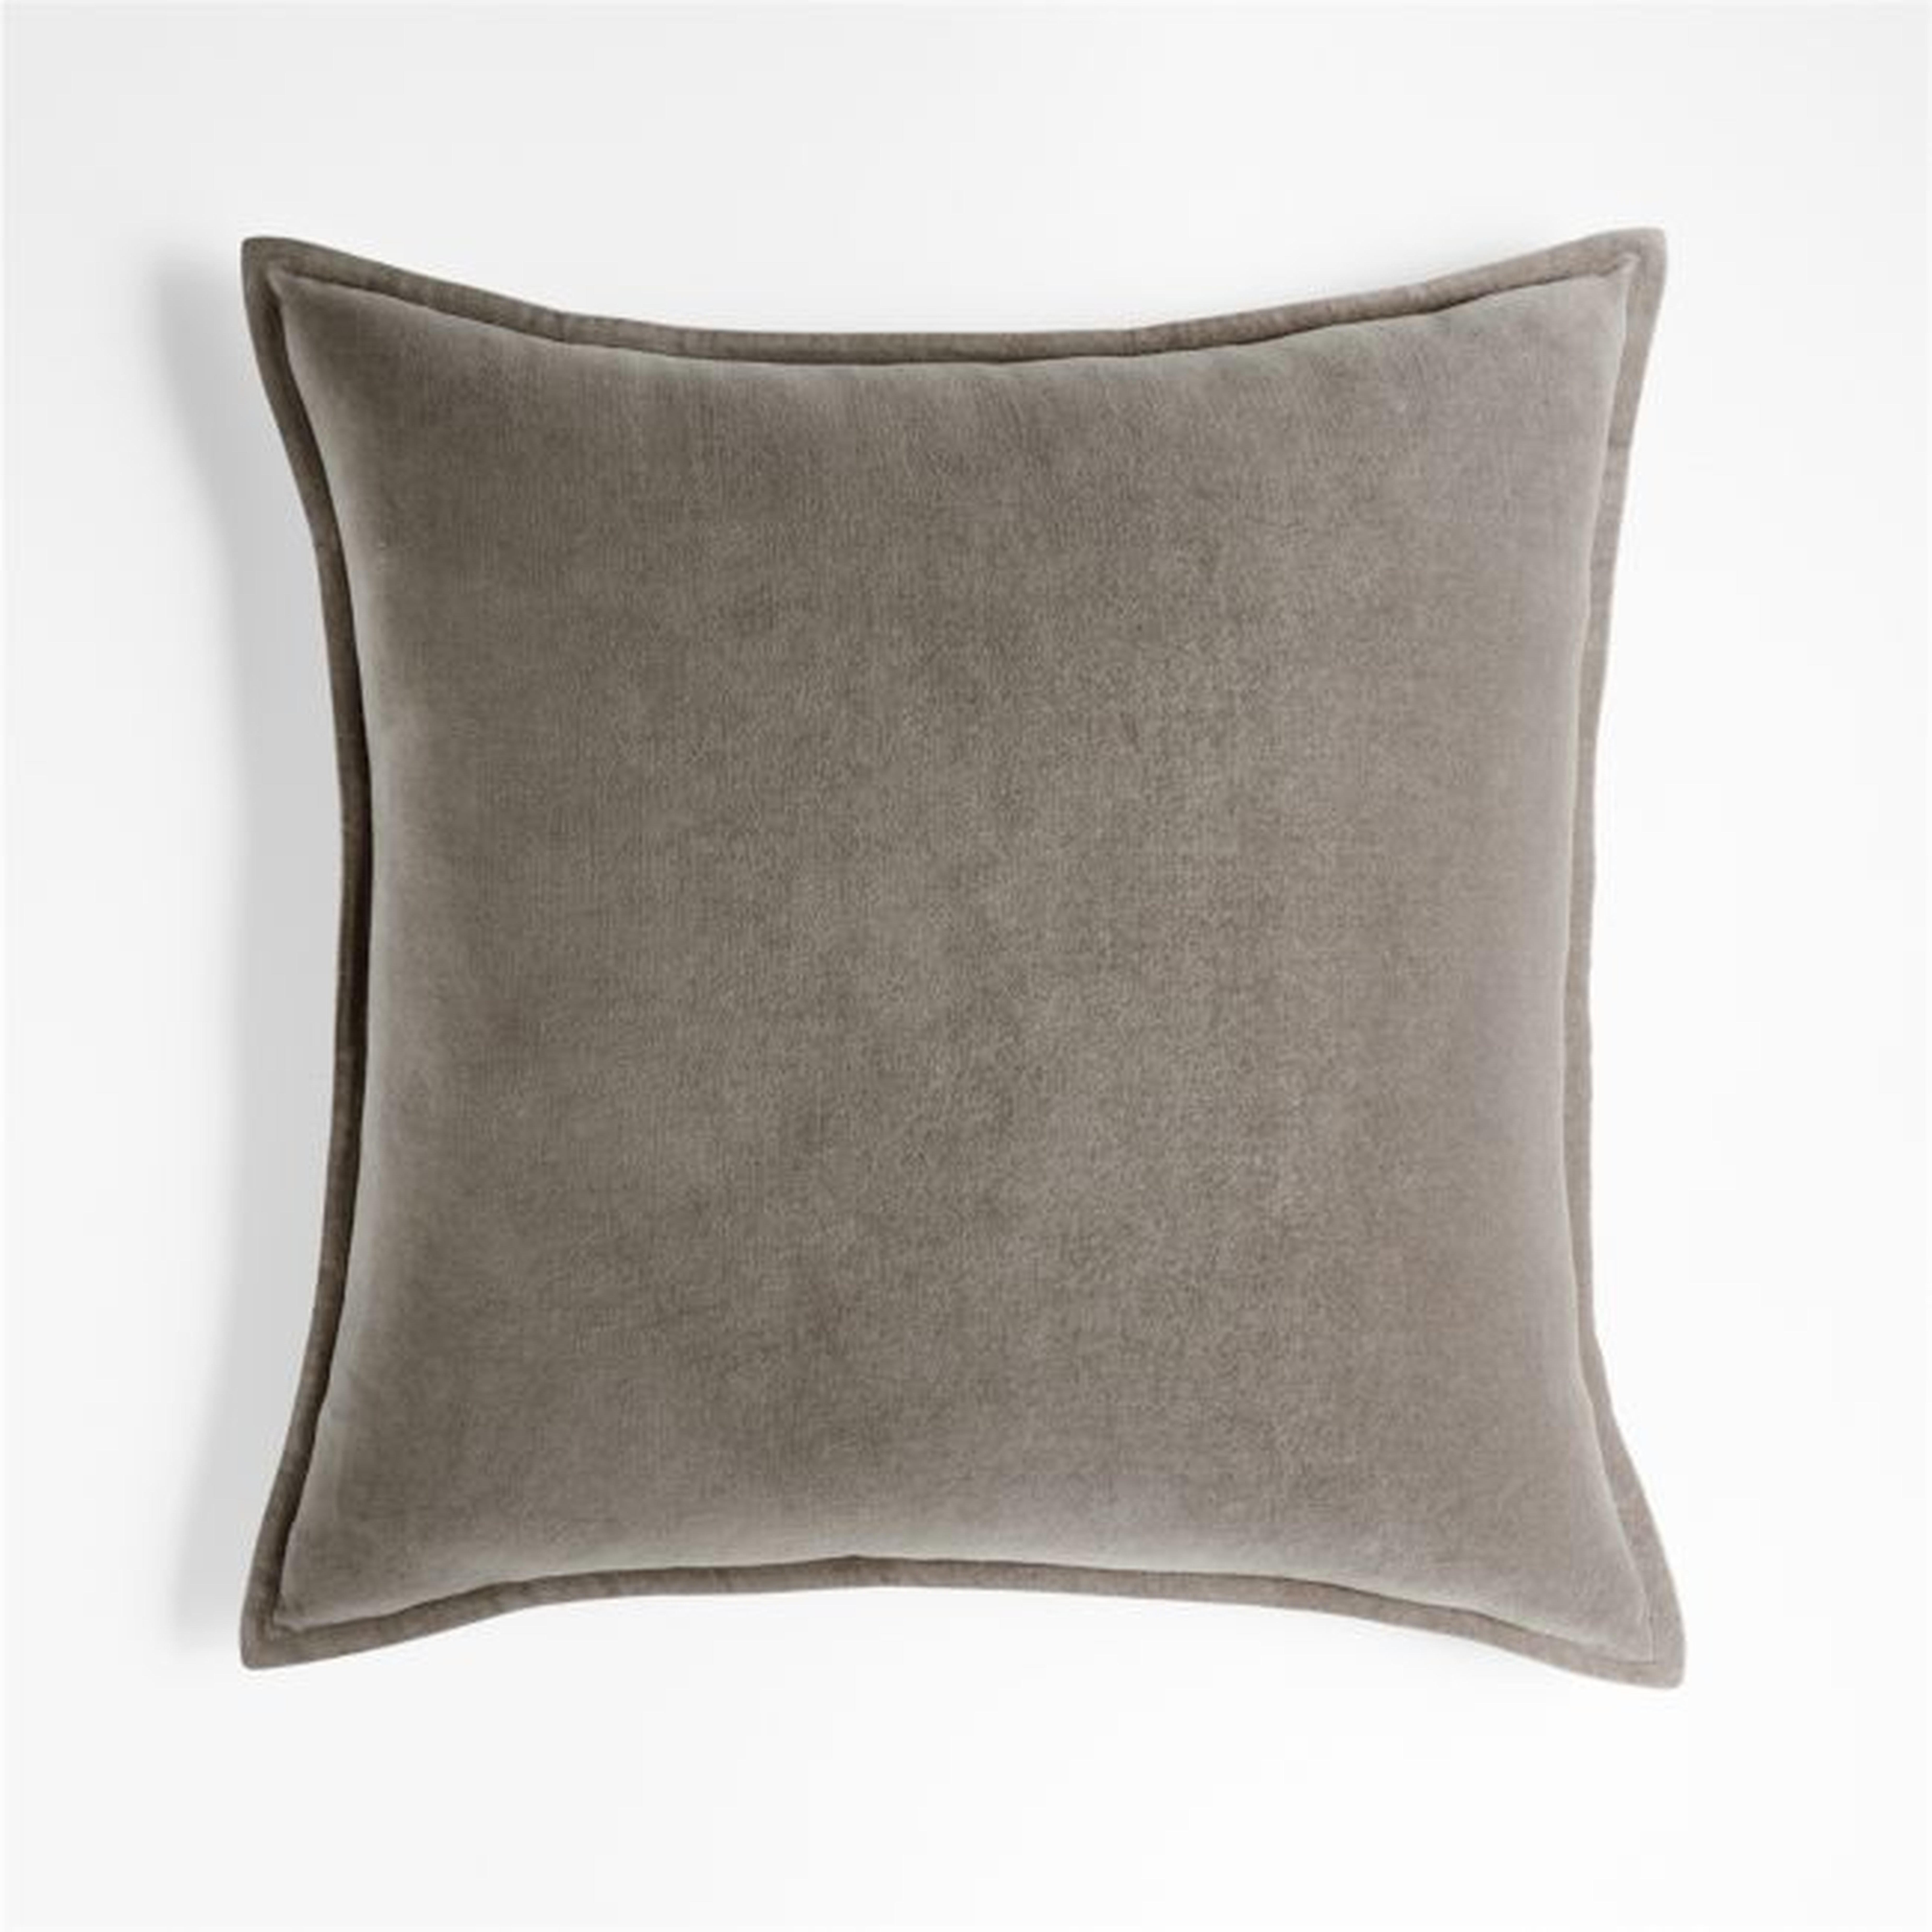 Frost 20"x20" Washed Cotton Velvet Throw Pillow Cover - Crate and Barrel